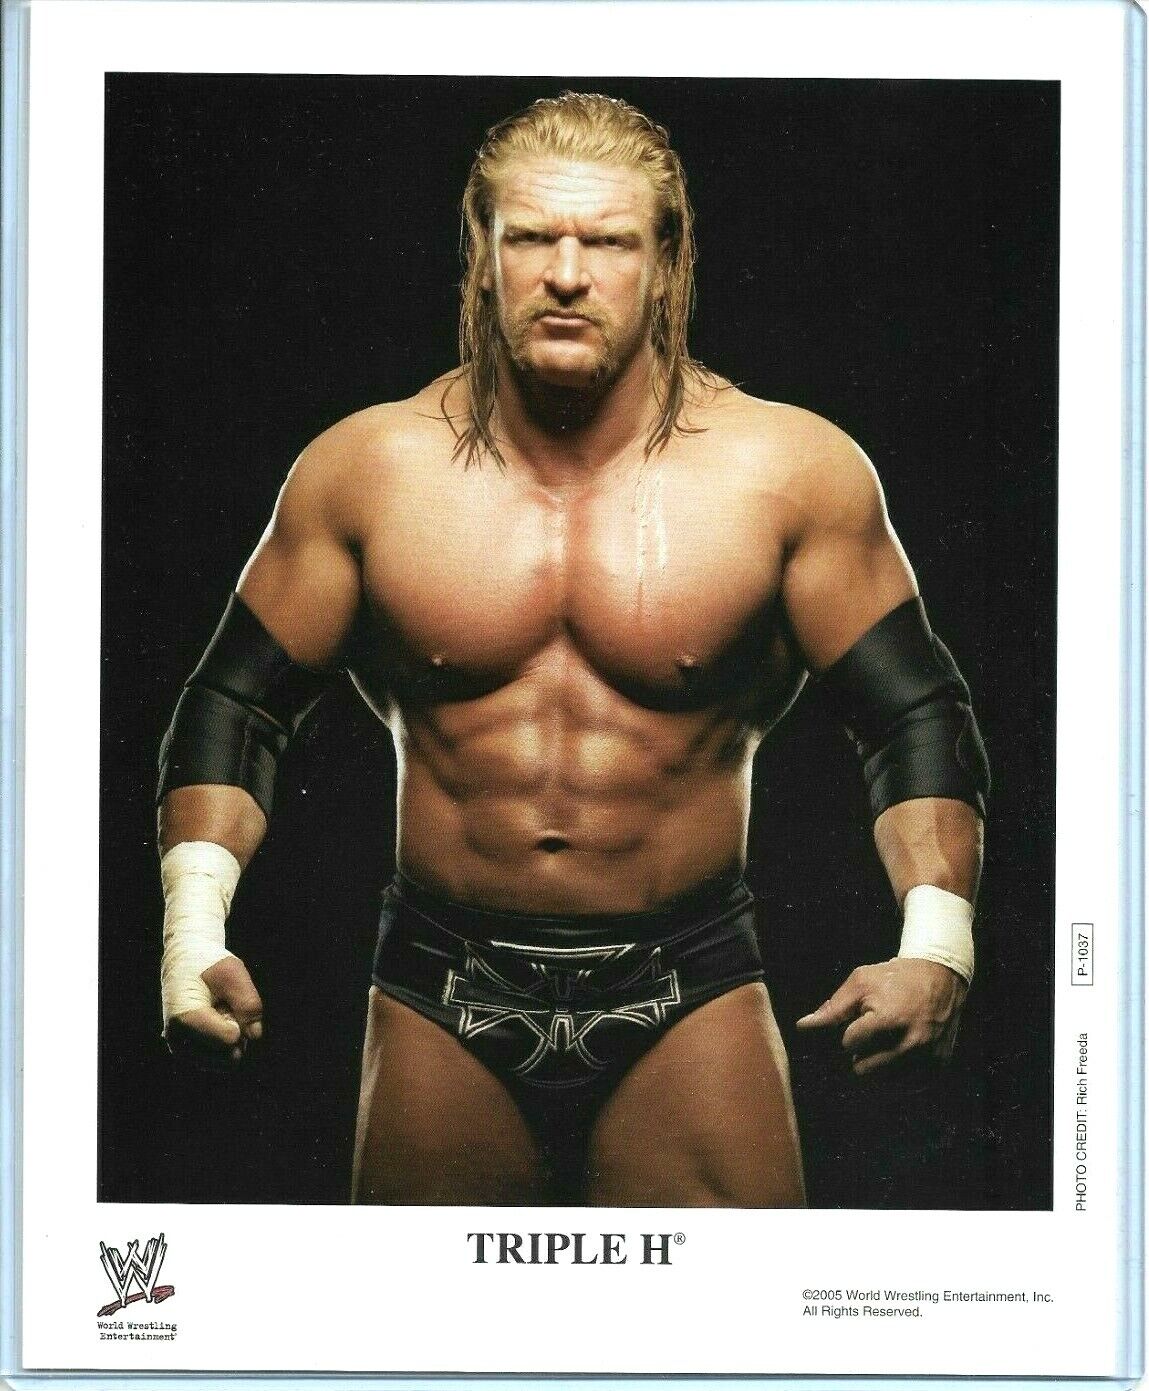 WWE TRIPLE H P-1037 OFFICIAL LICENSED AUTHENTIC ORIGINAL 8X10 PROMO Photo Poster painting RARE